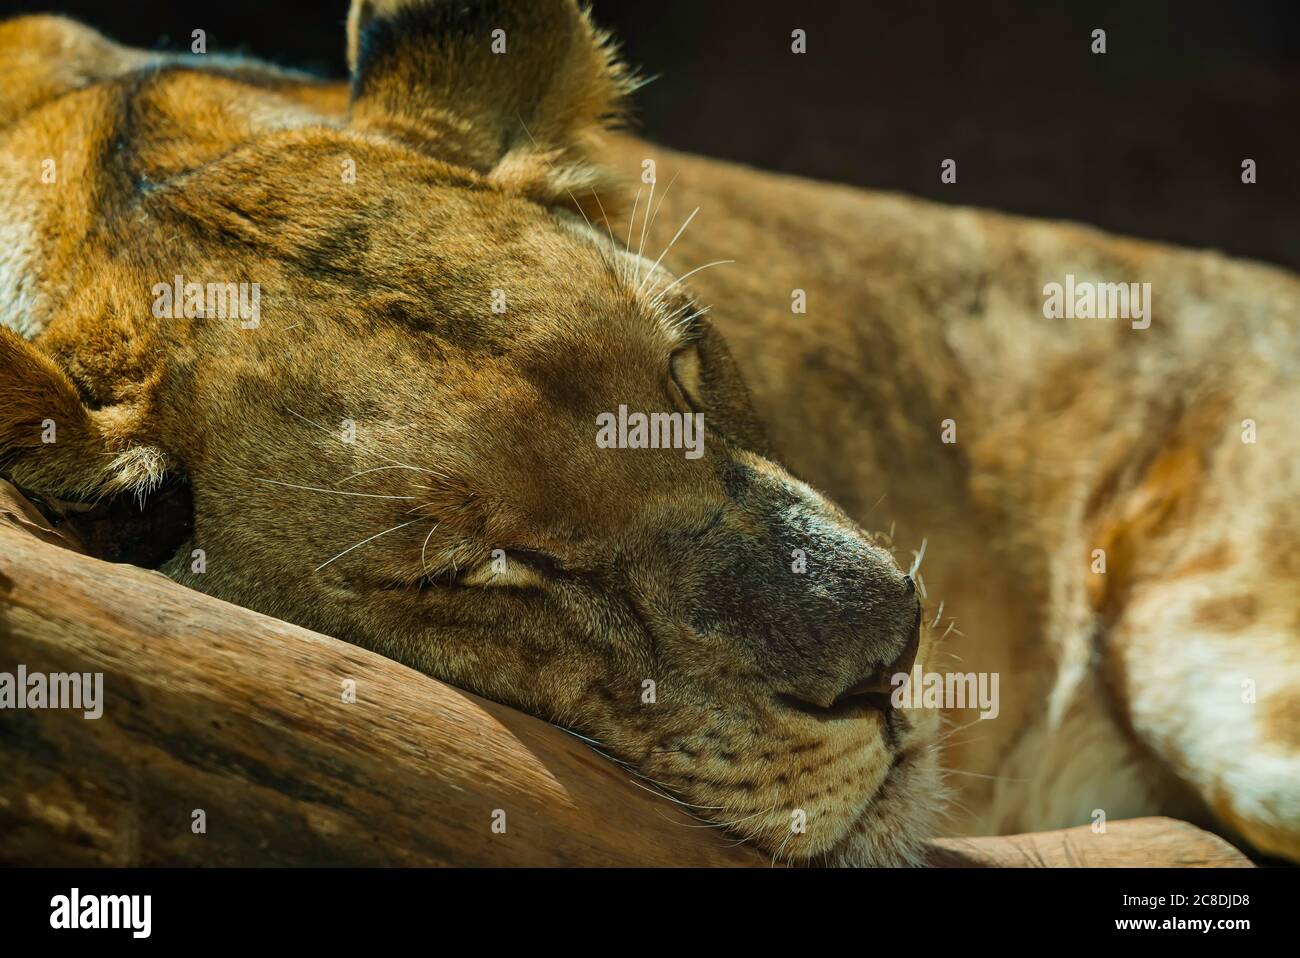 Close up of lioness sleeping. Predator taking a nap. Portrait of a lion resting on the wood Stock Photo